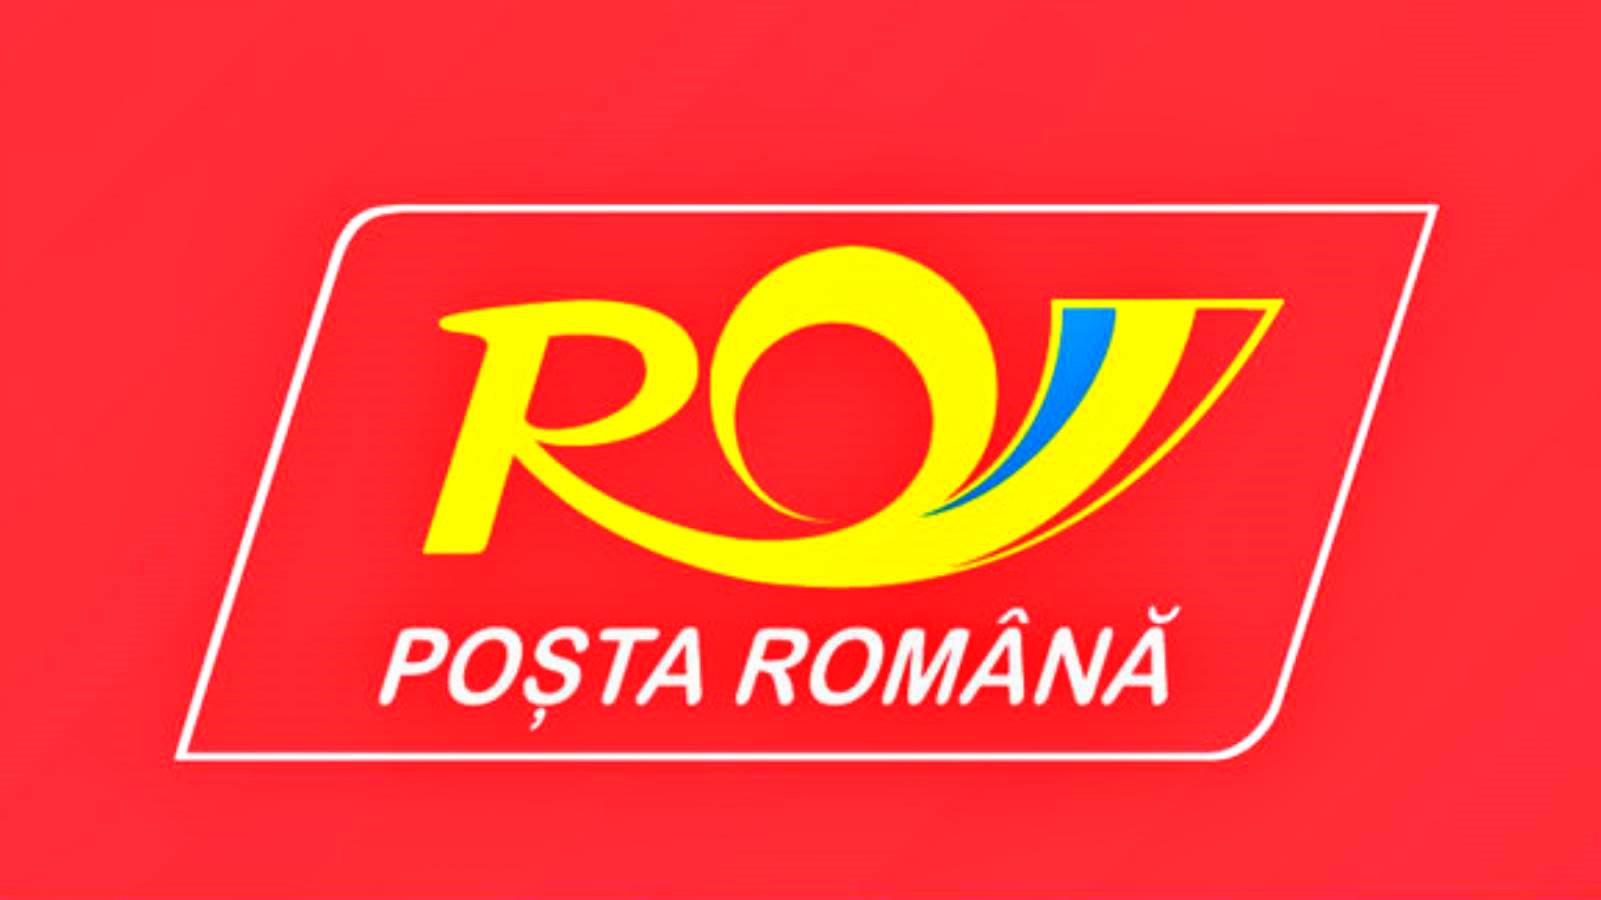 Romanian Post Official List of Items Prohibited for Shipping